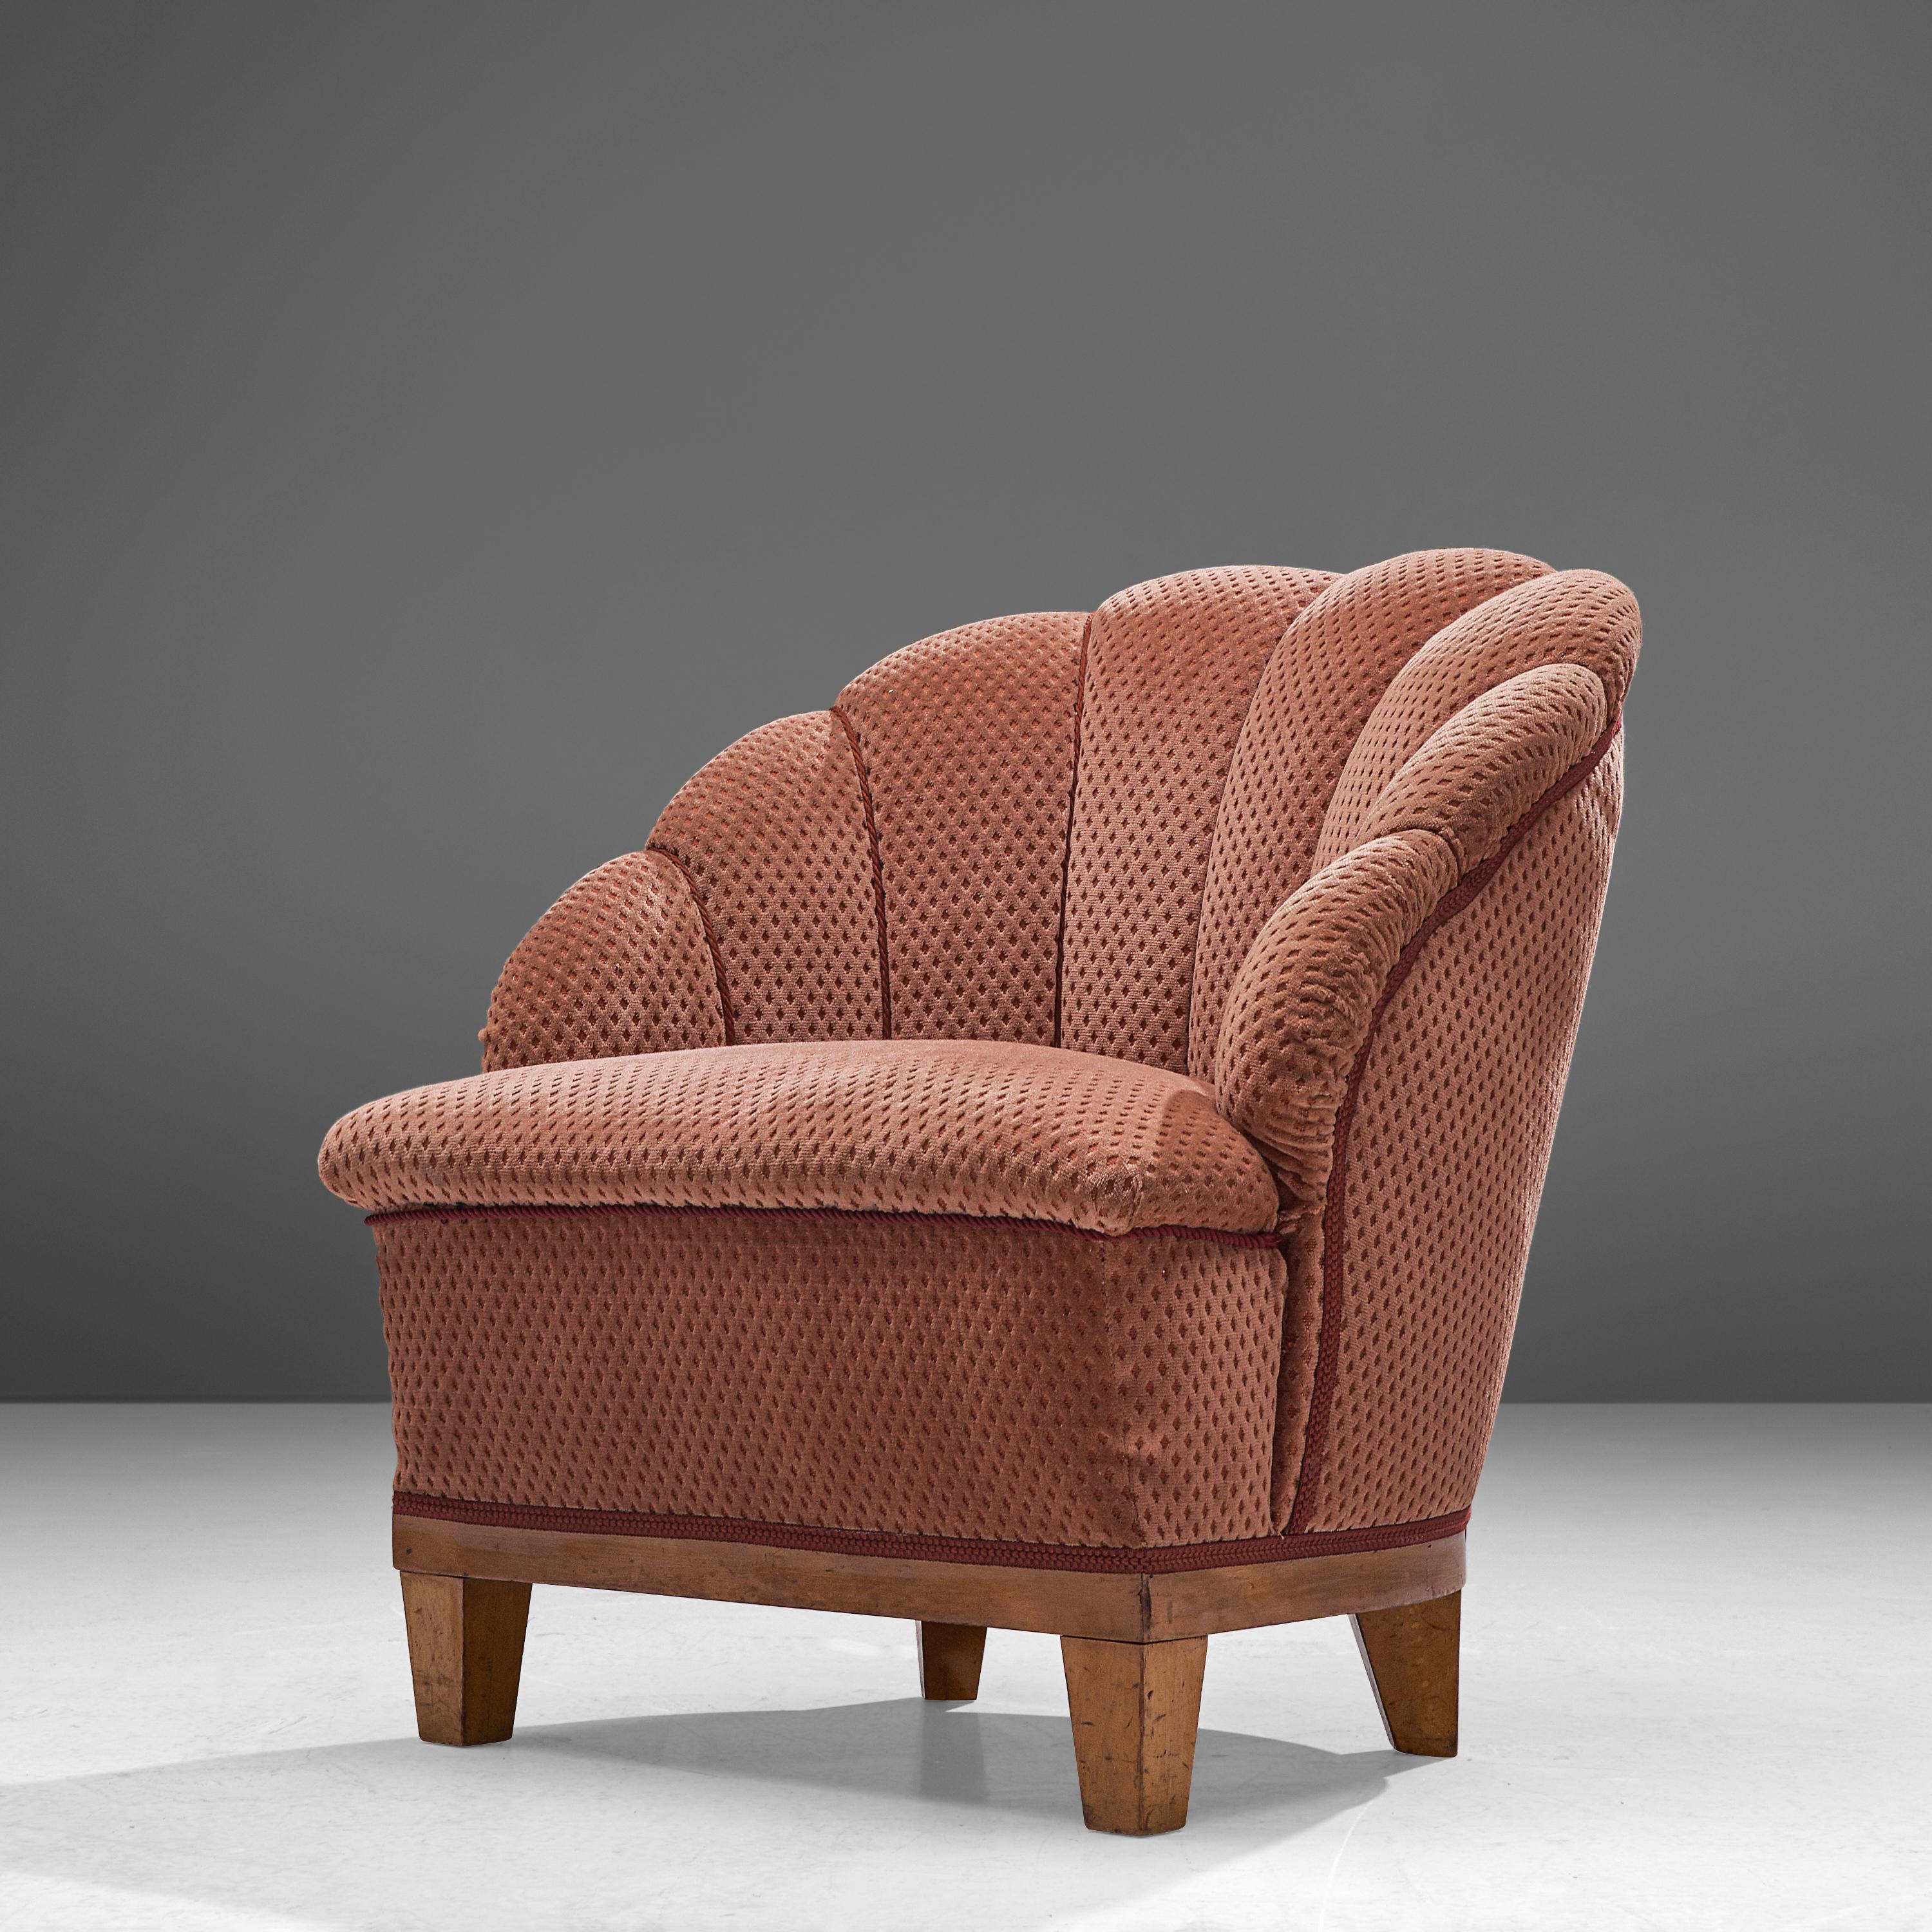 Lounge chair, fabric, oak, France, 1940s

Expressive French lounge chair with flowerlike shaped backrest. The round shape of this wonderful armchair features a vividly formed upholstery. Vertical lines structure the back- and armrest and end in a